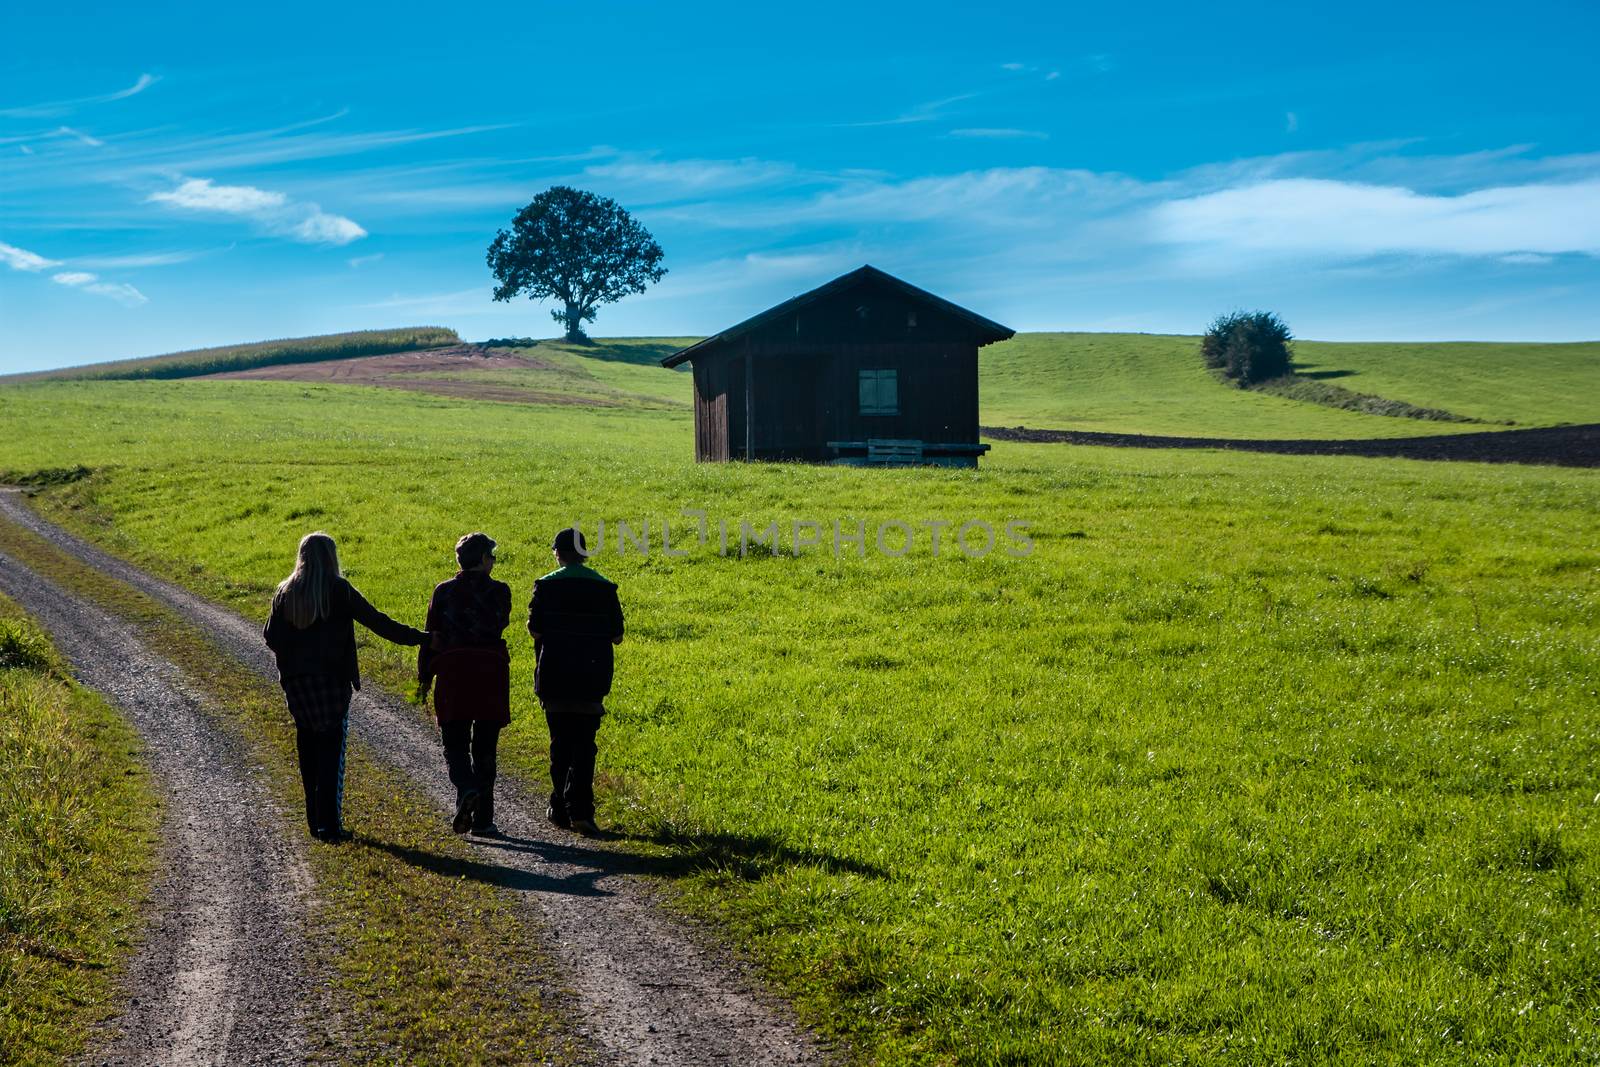 Three people walking on a dirt road next to a green meadow with a hut with blue sky and some clouds.